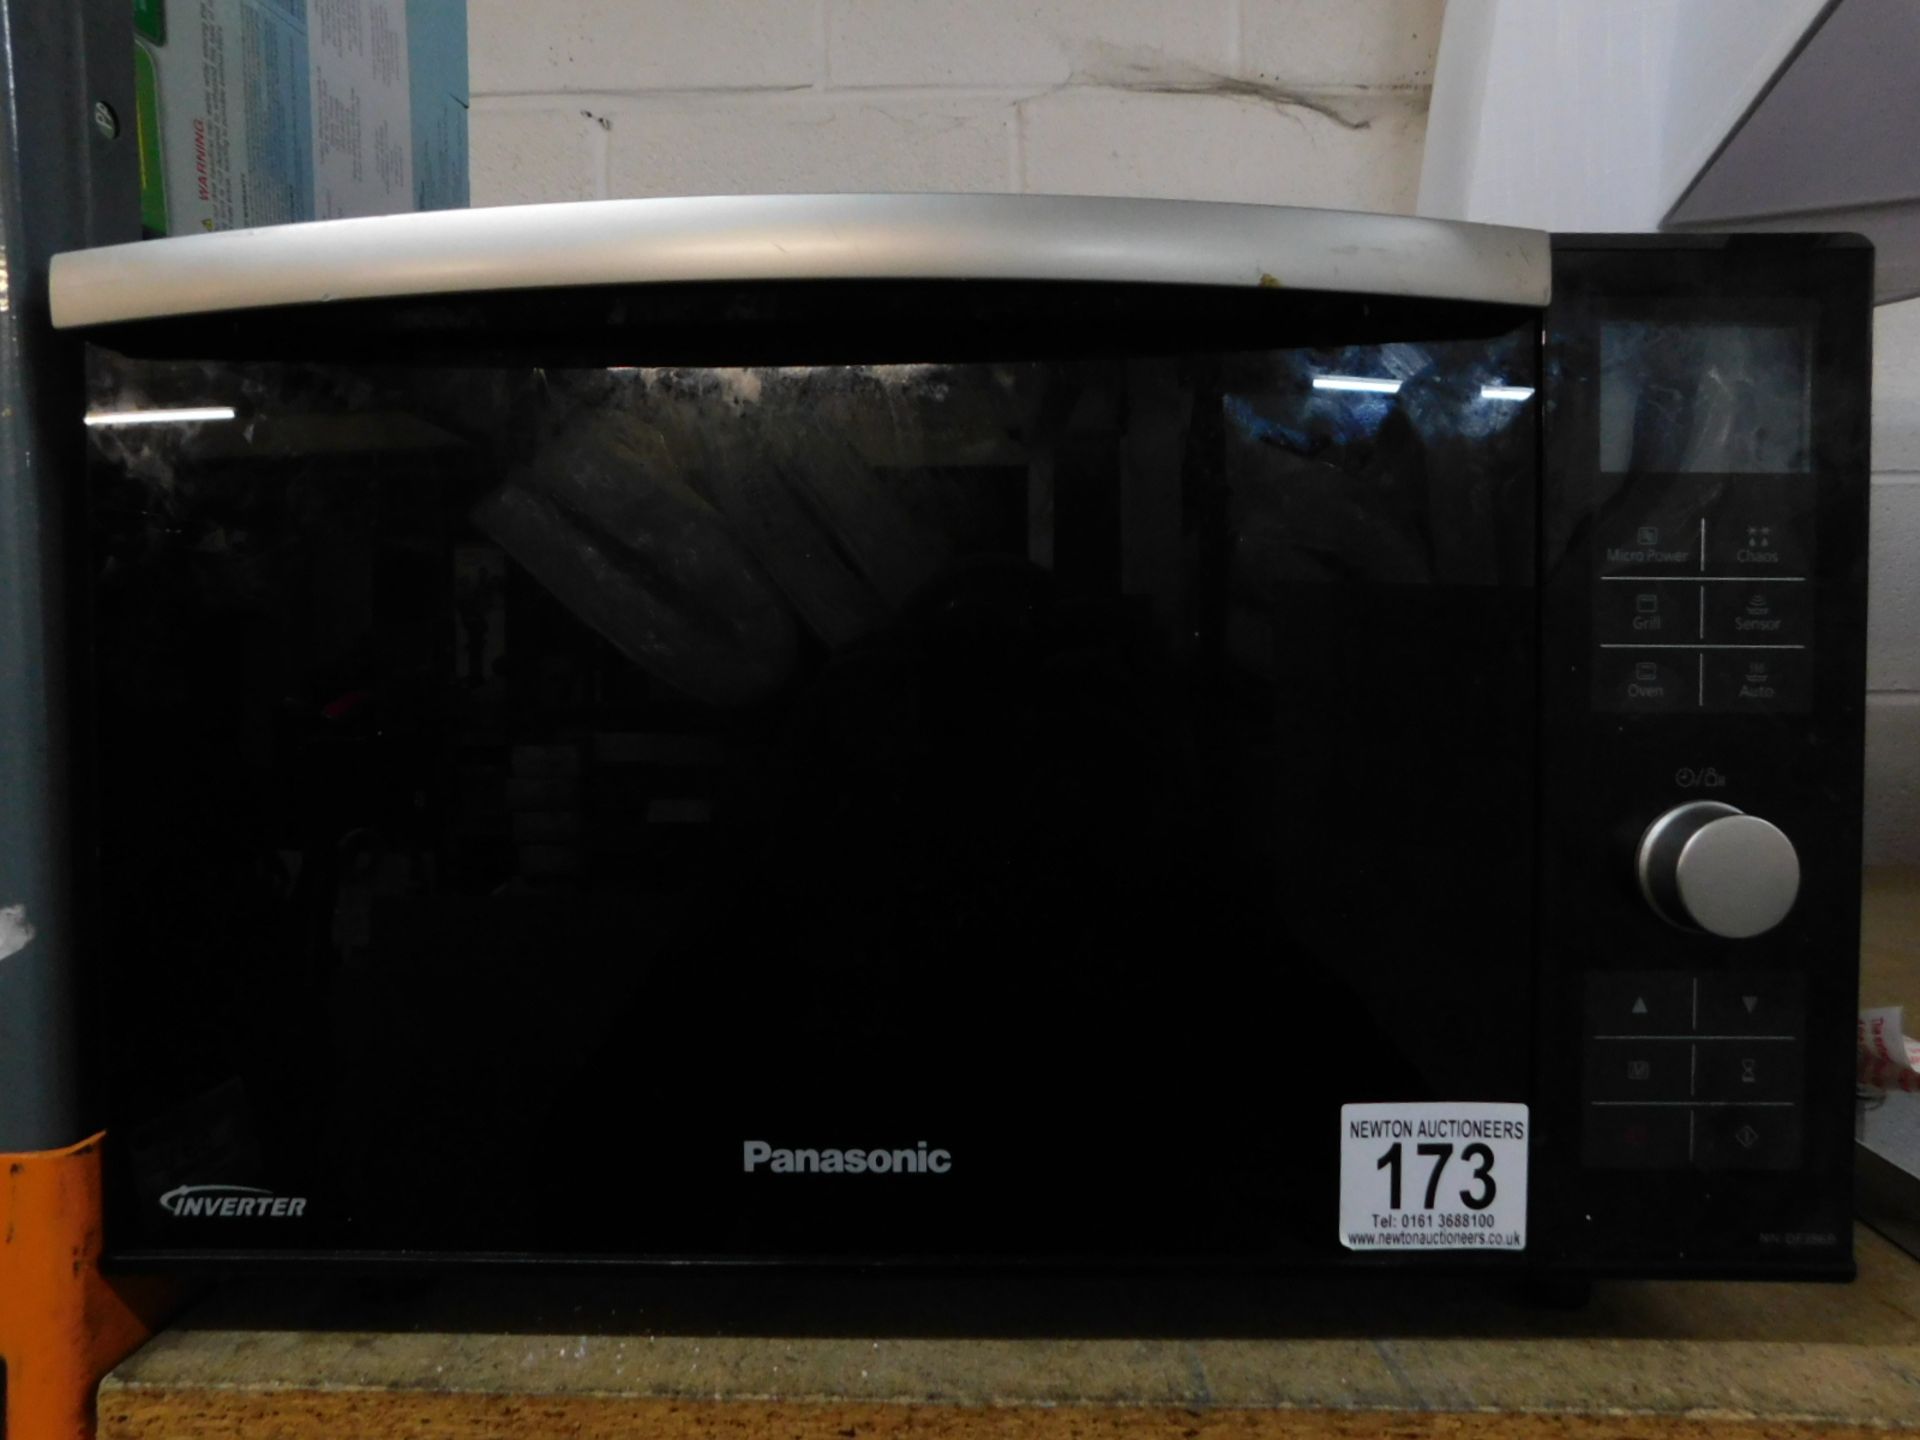 1 PANASONIC NN-DF386B 3-IN-1 1000W 23L BLACK COMBINATION MICROWAVE OVEN RRP Â£279.99 (HEAVILY USED)